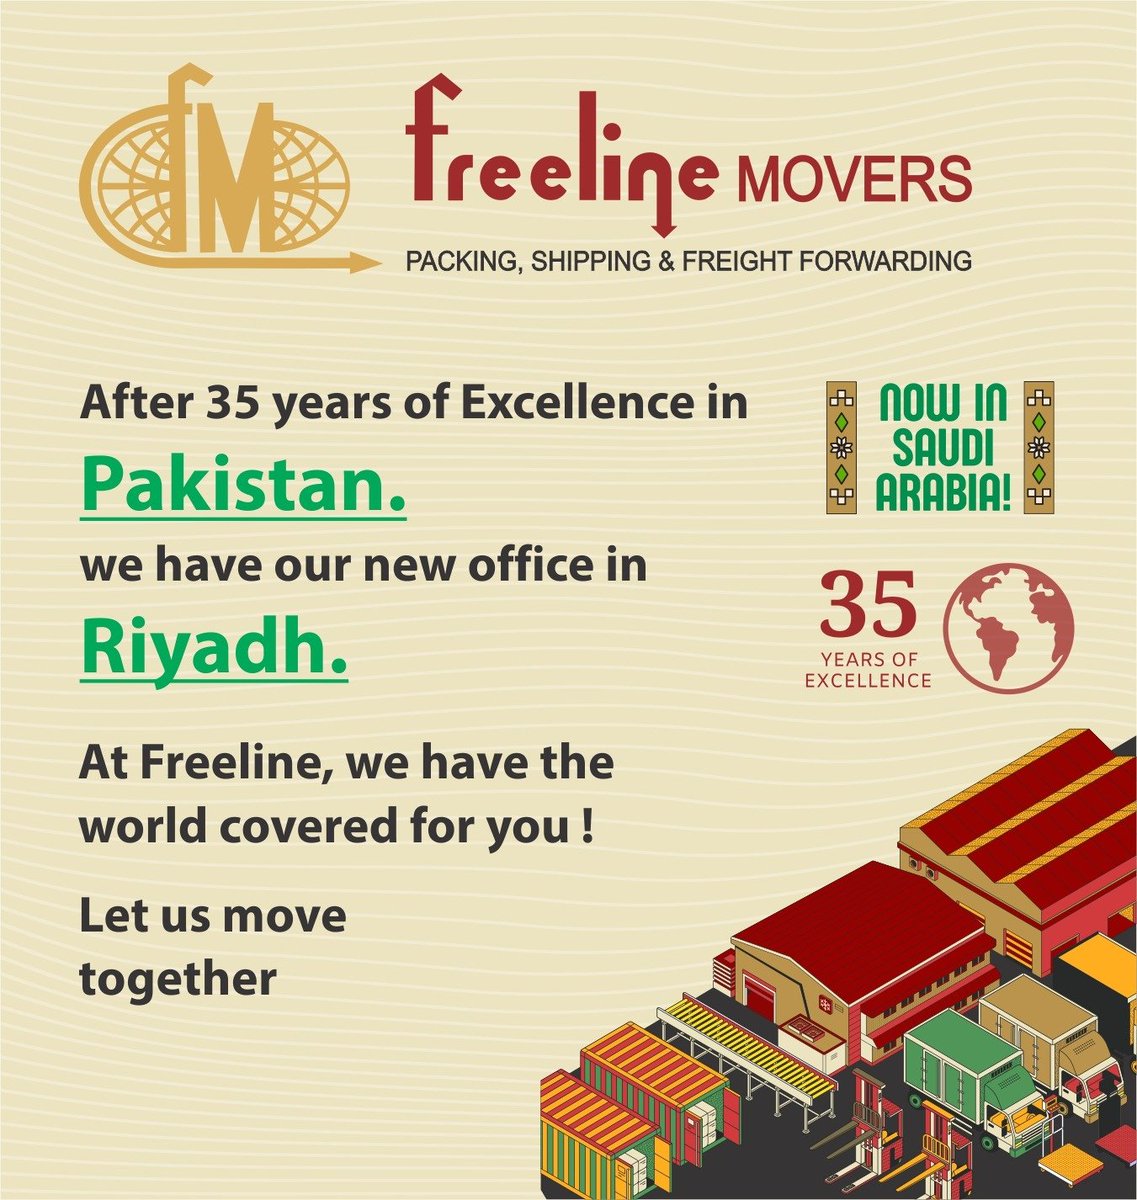 Empowering Saudi Arabia...
#packing #shipping #shippingworldwide #freight #freightforwarding #freightforwarder #sealife #airfreight #Movers #packing #freelinemovers #Relocation #petrelocation #OfficeRemovals #finearthandling #customclearance #projectmanagementt #LandAirSea